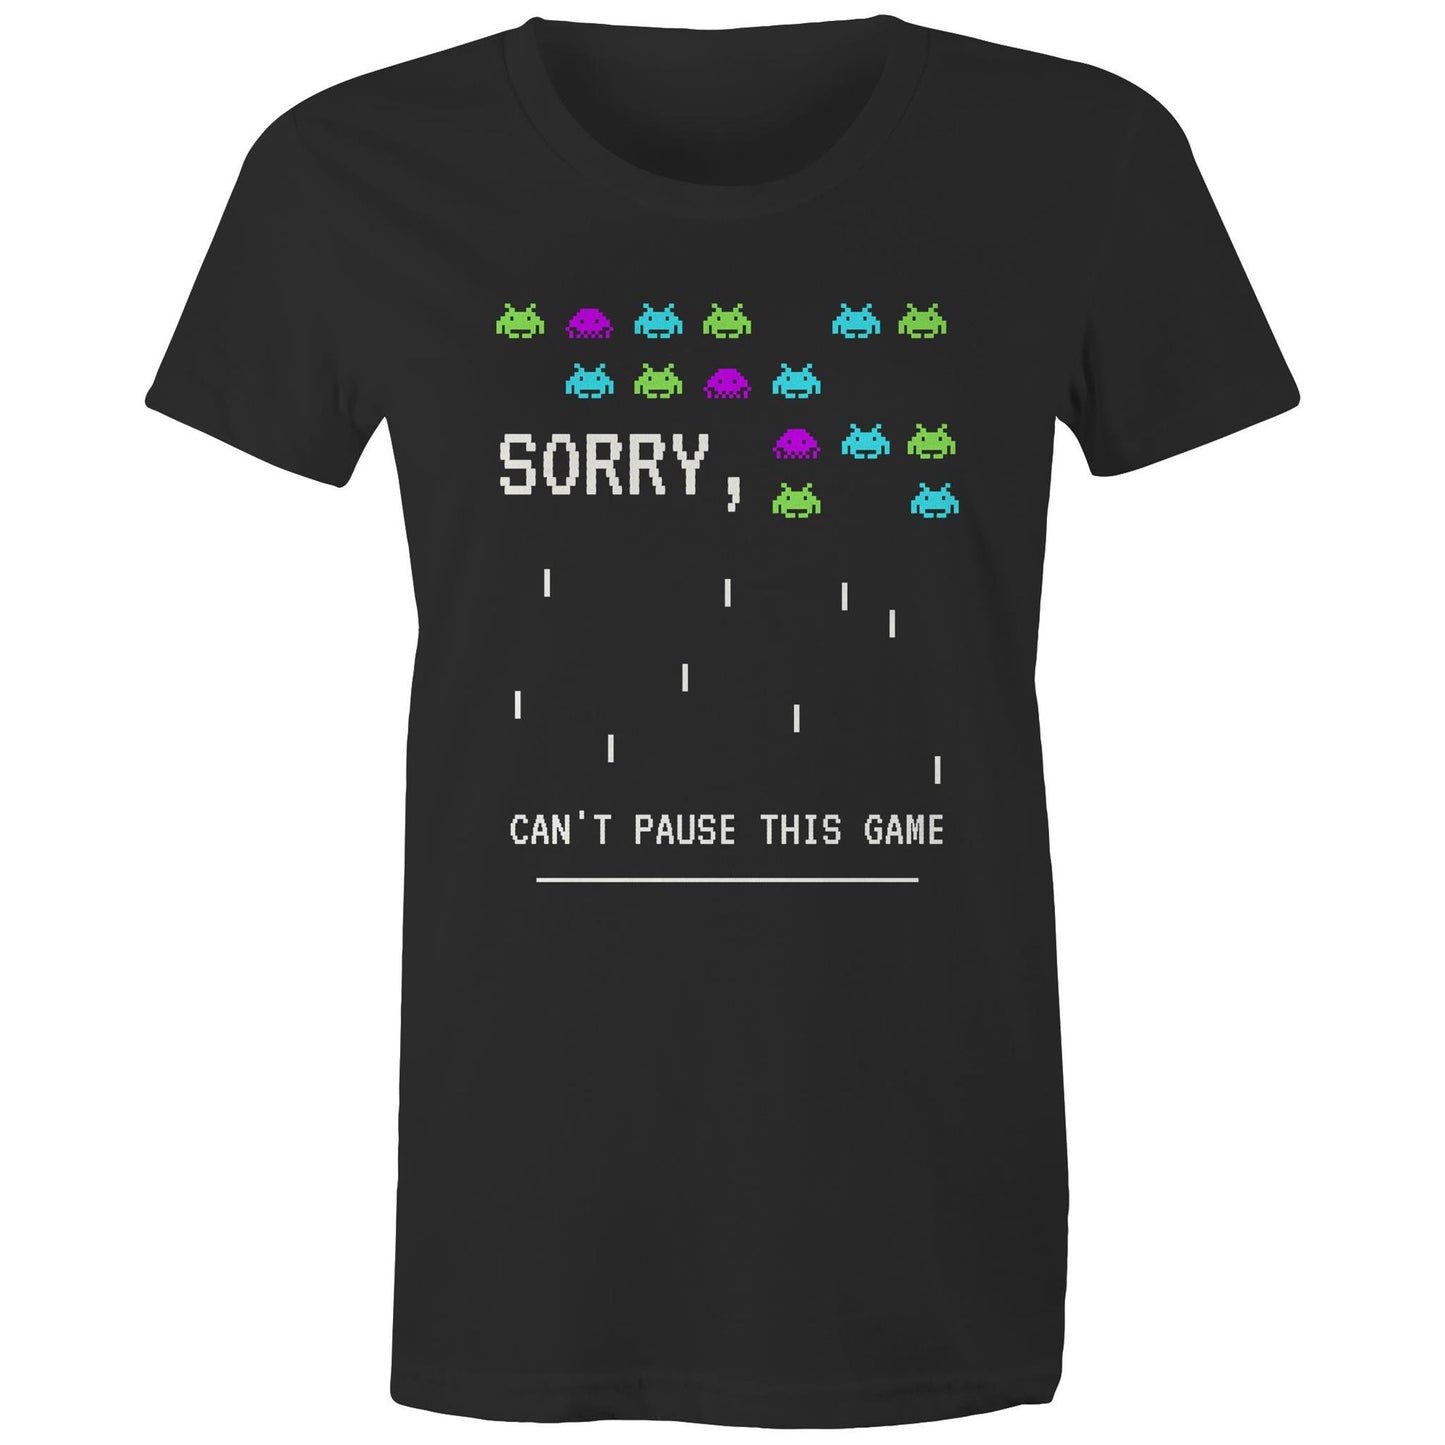 Sorry, Can't Pause This Game - Womens T-shirt Black Womens T-shirt Games